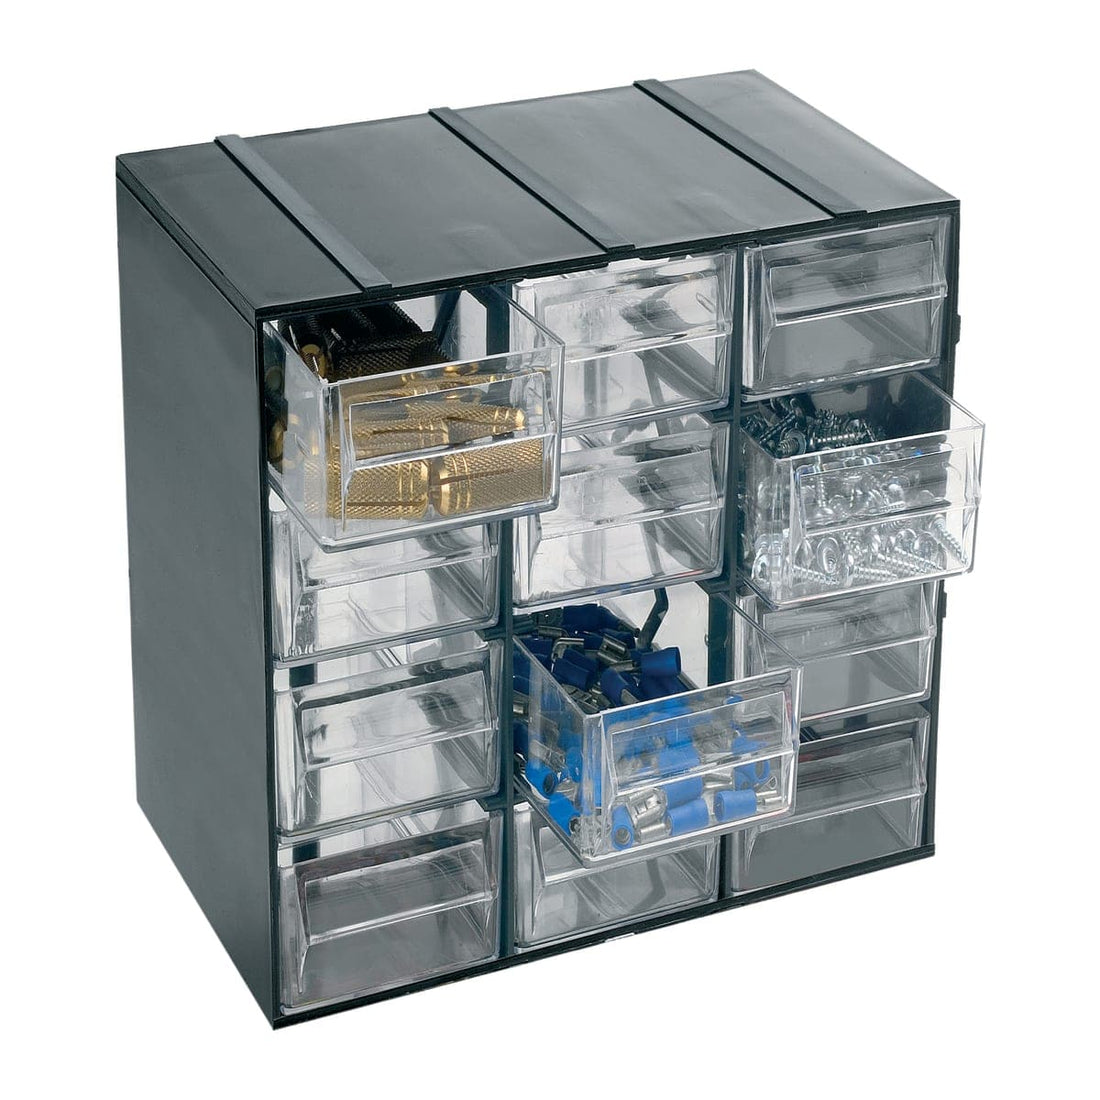 CHEST OF DRAWERS WITH 12 TRANSPARENT DRAWERS MEASURING 190X142X228MM - best price from Maltashopper.com BR400500248